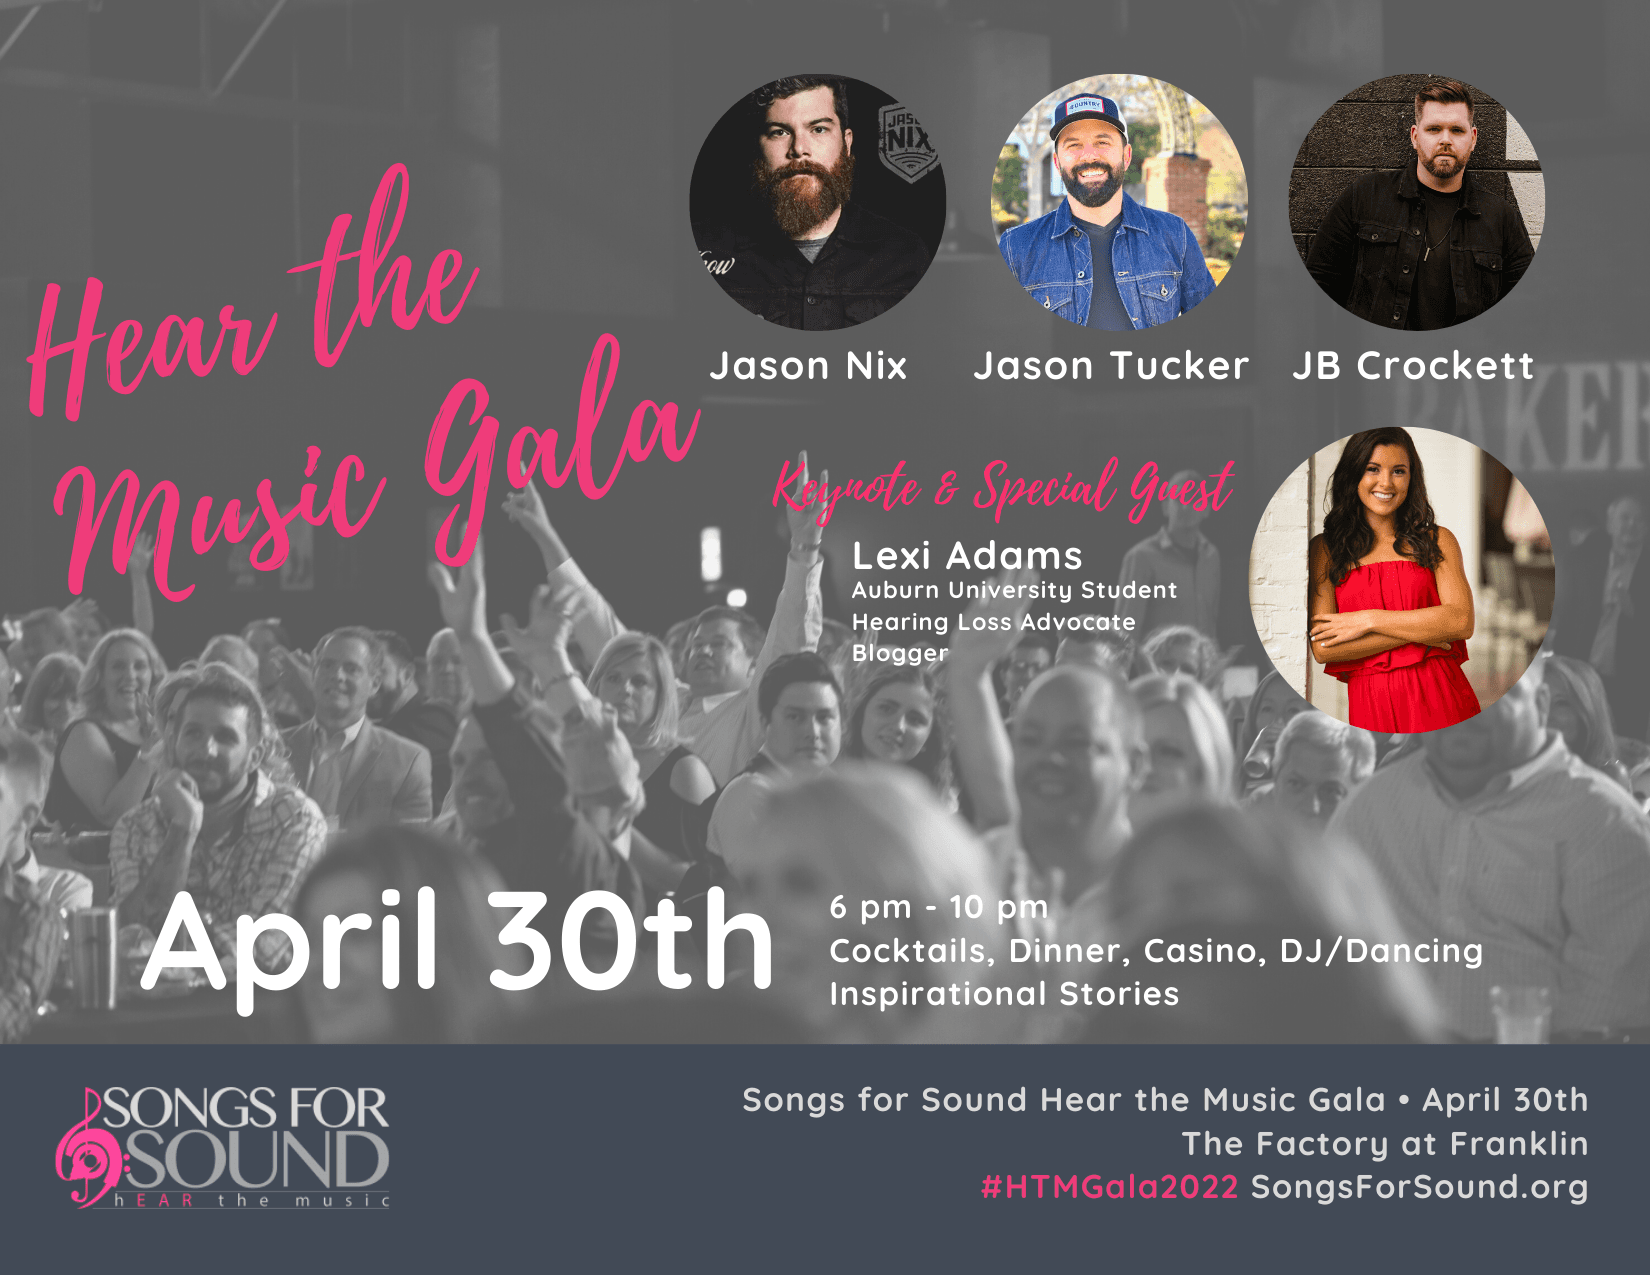 The Annual Hear the Music Gala 2022! April 30th at The Factory at Franklin!